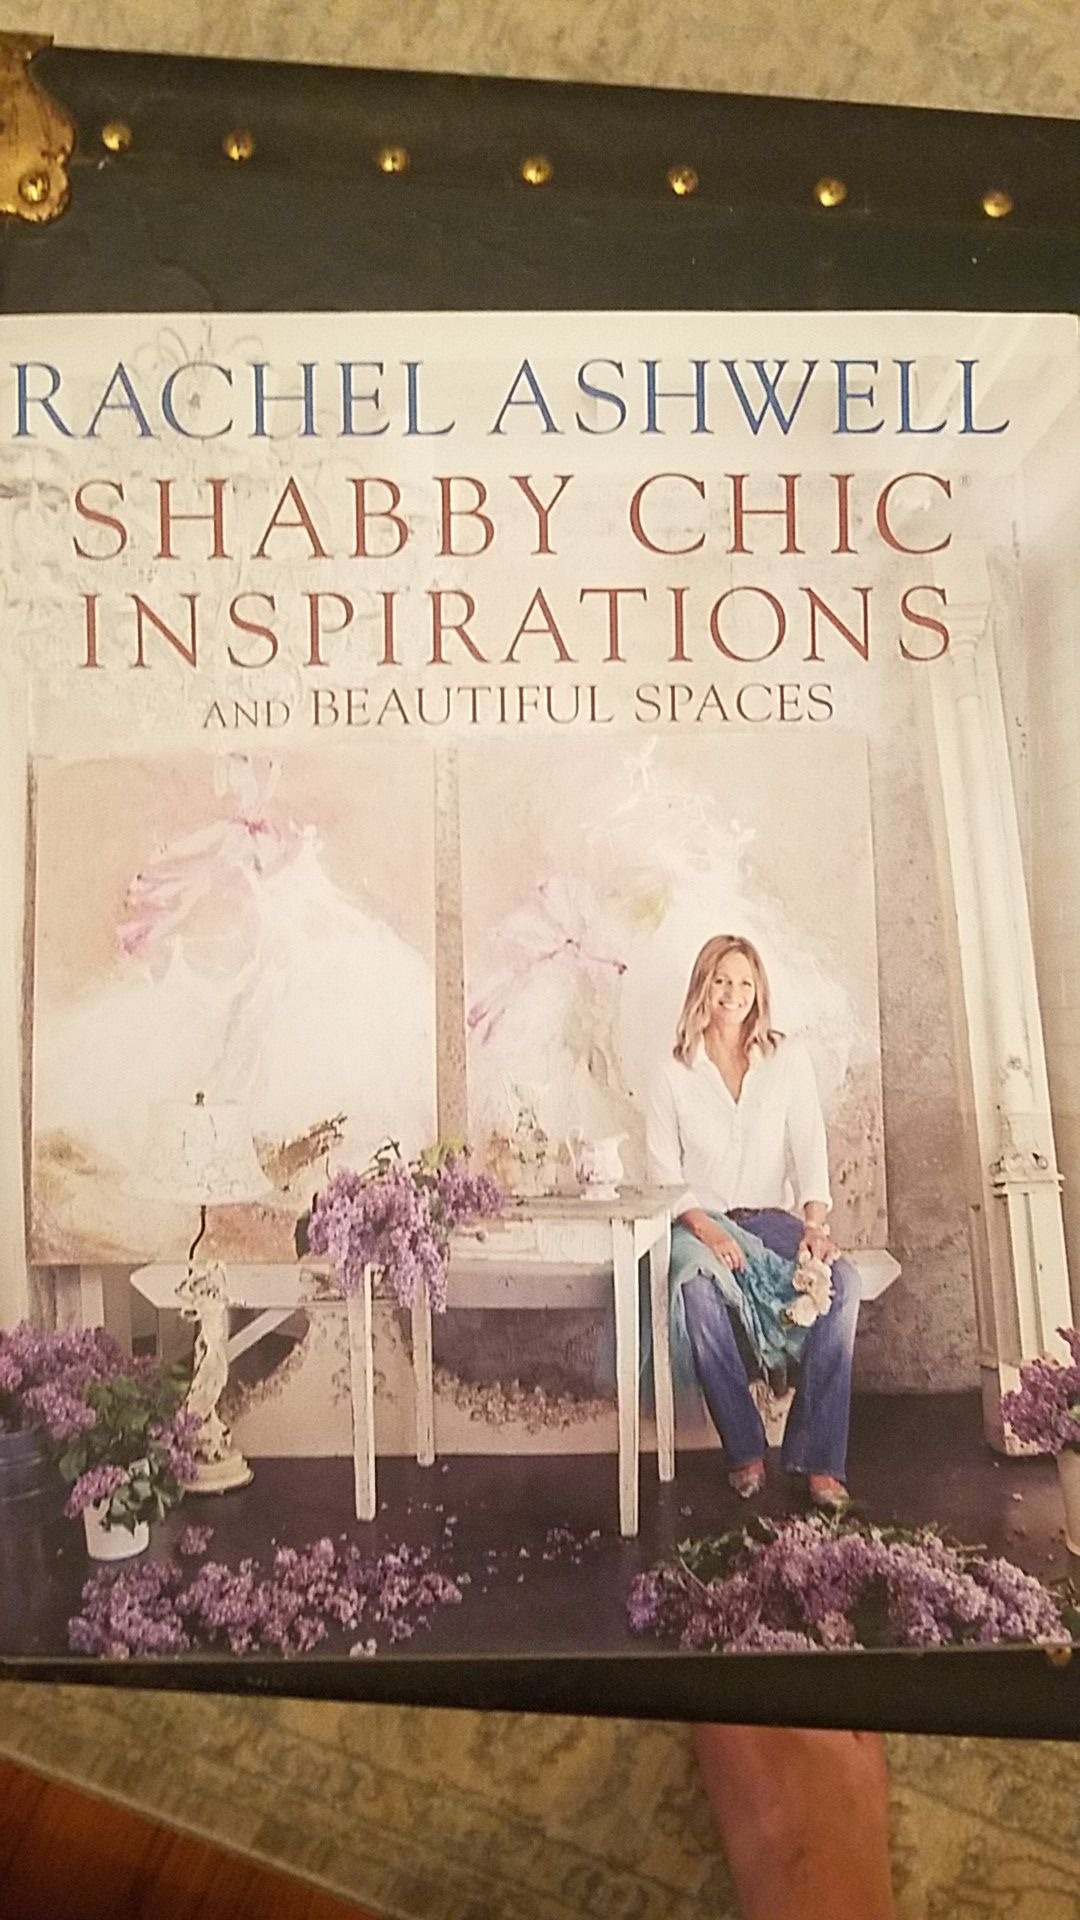 Book : Shabby Chic Inspirations and Beautiful Spaces by Rachel Ashwell